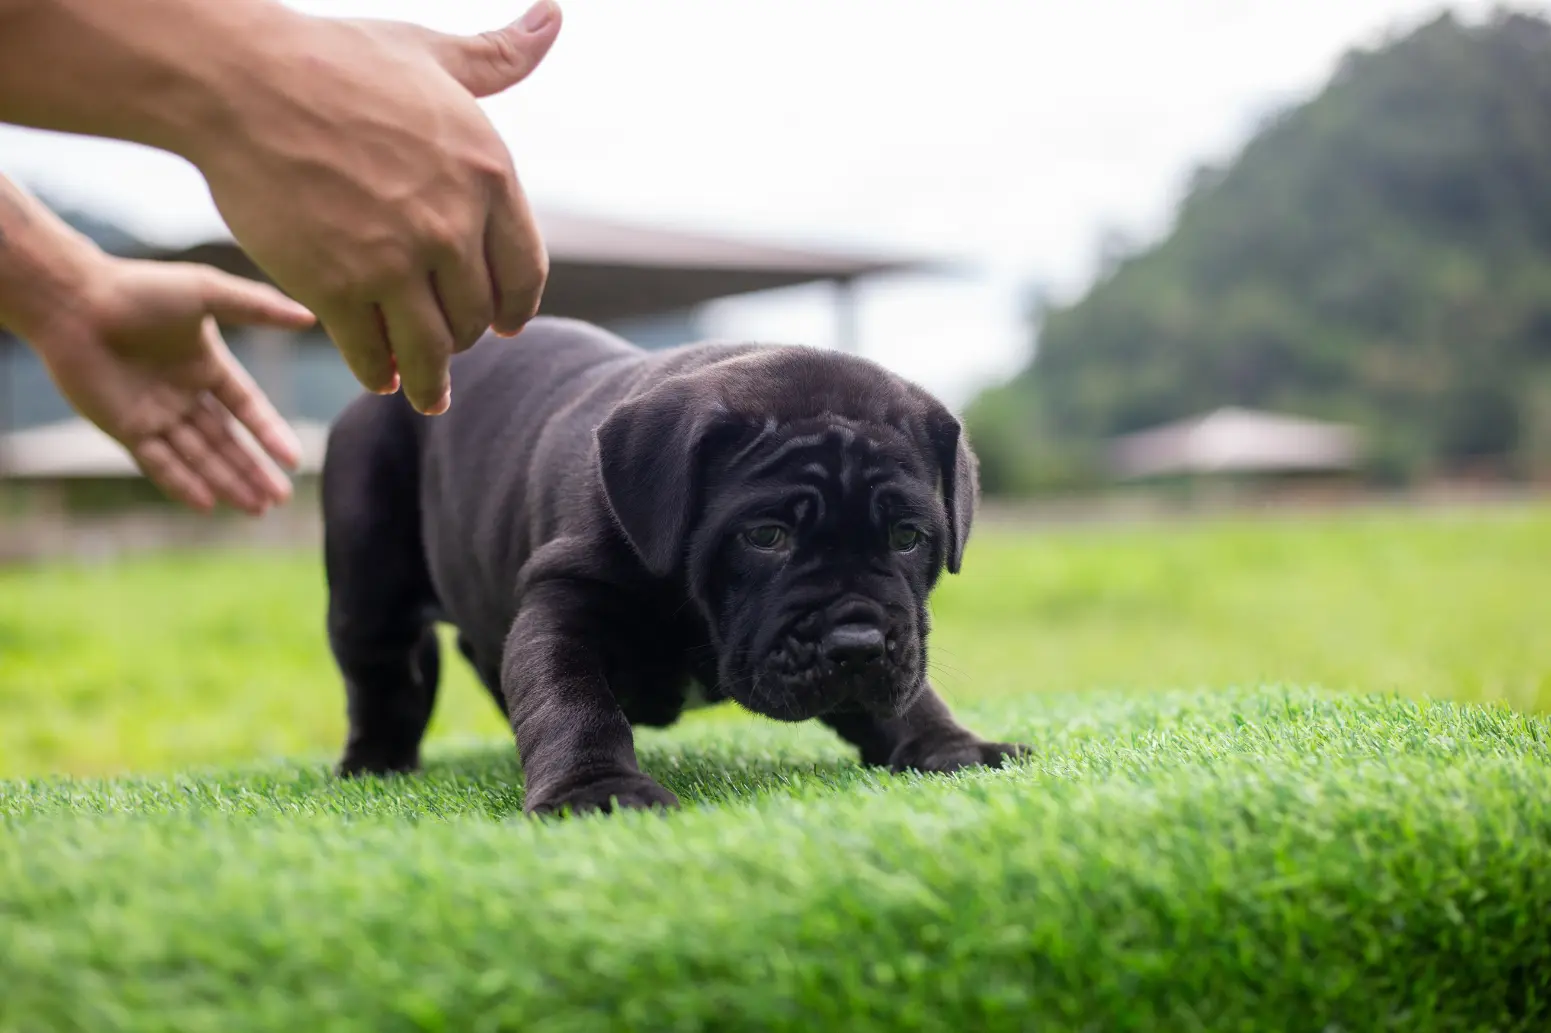 a black puppy playing on artificial turf